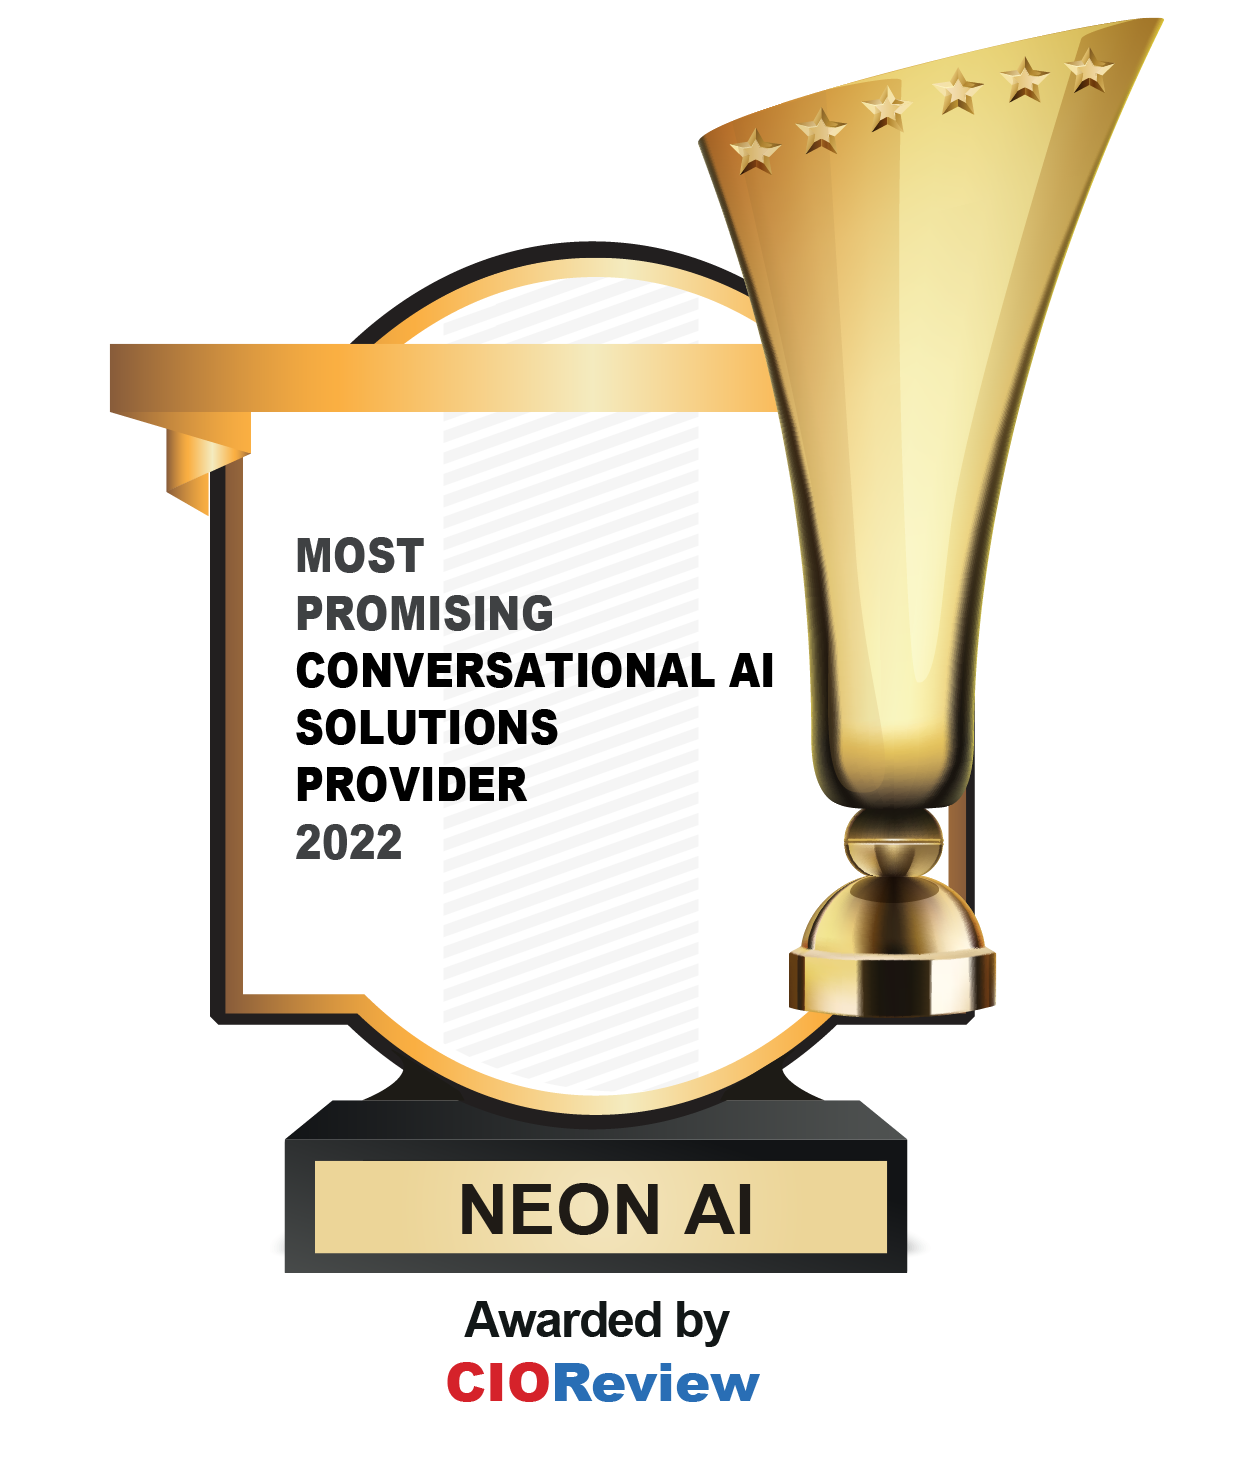 Neon AI CIO Review Award for Most Promising Conversational AI Solutions Provider 2022